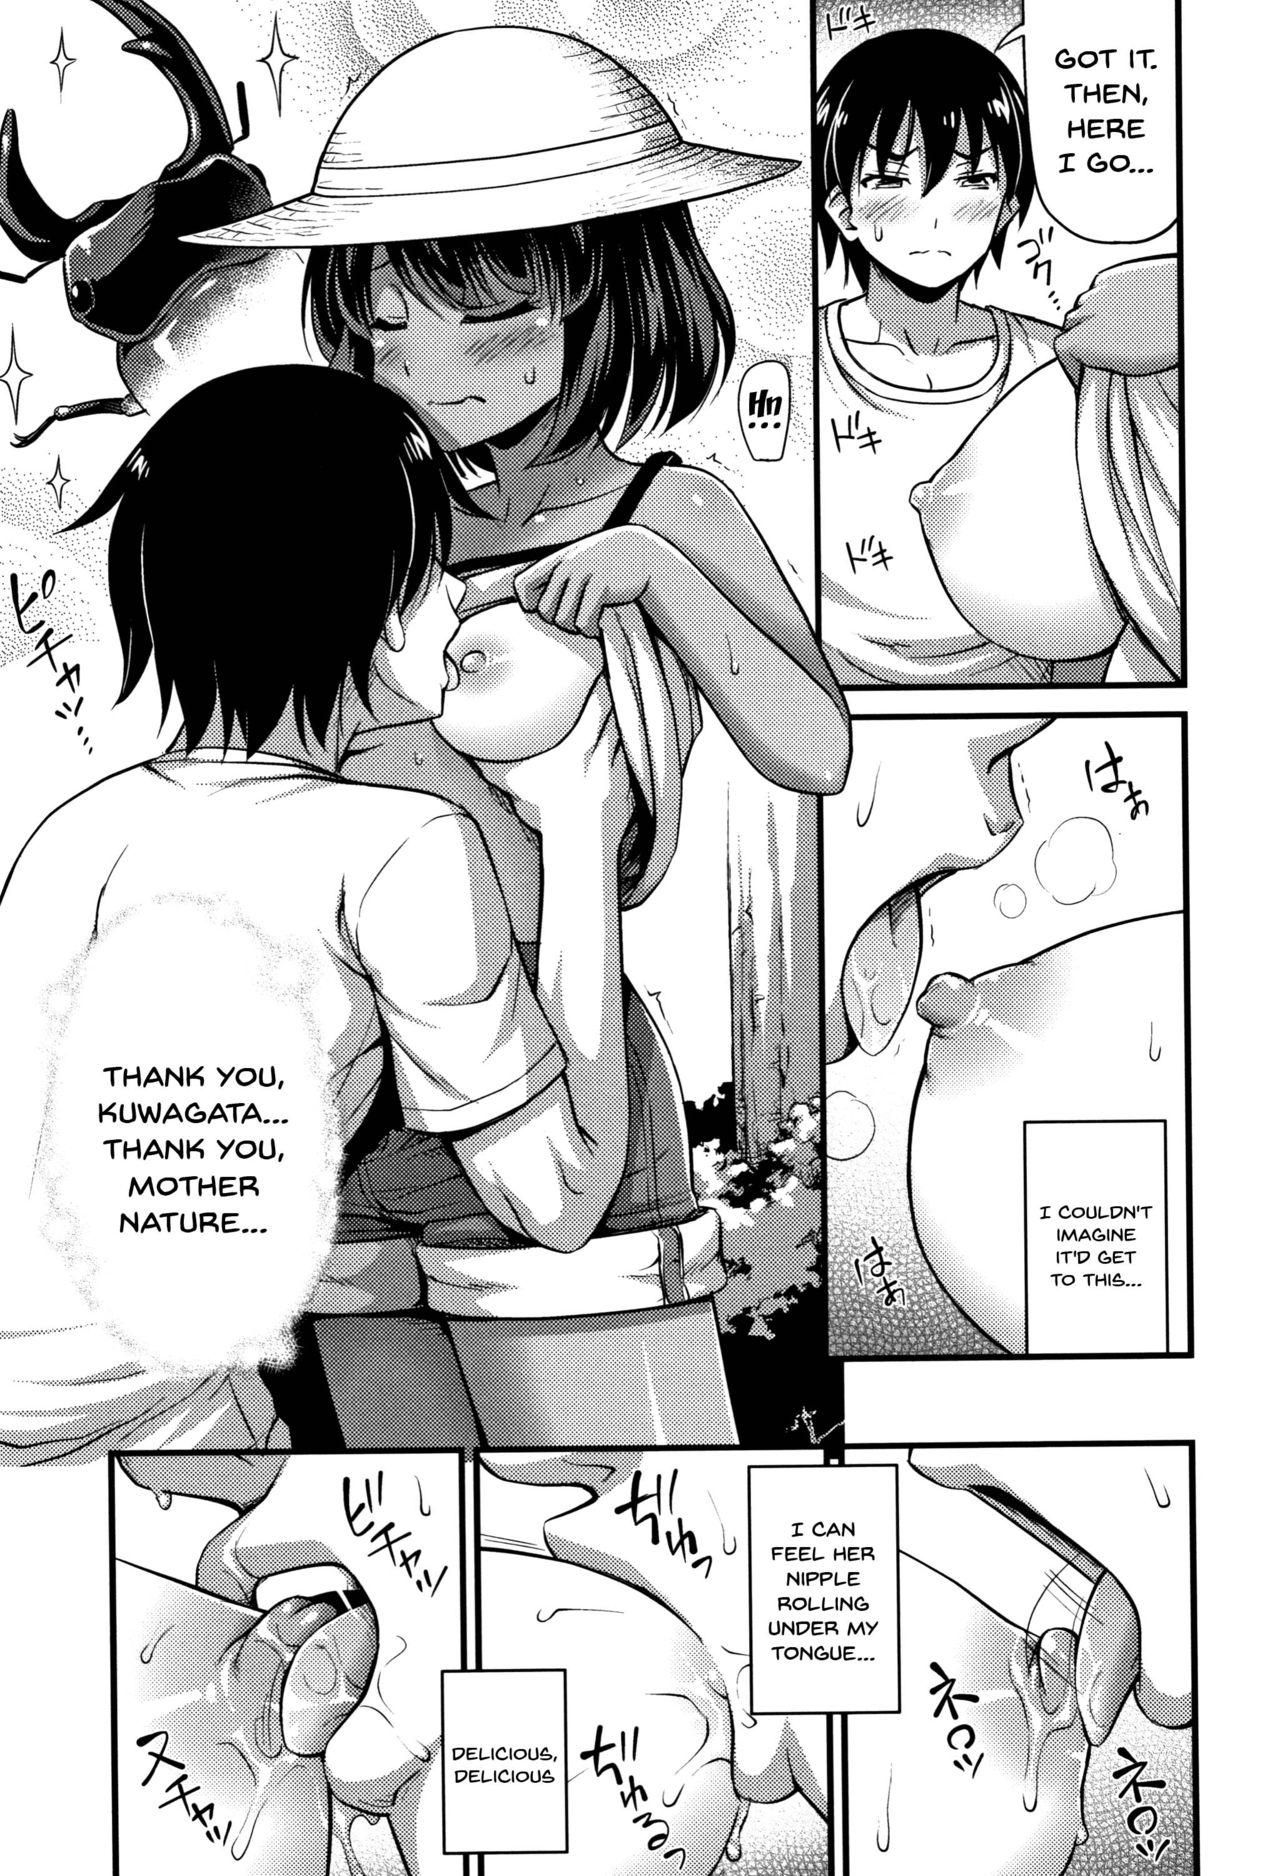 Real Orgasms Kuwagata no Doku | Stag Beetle Public Nudity - Page 5